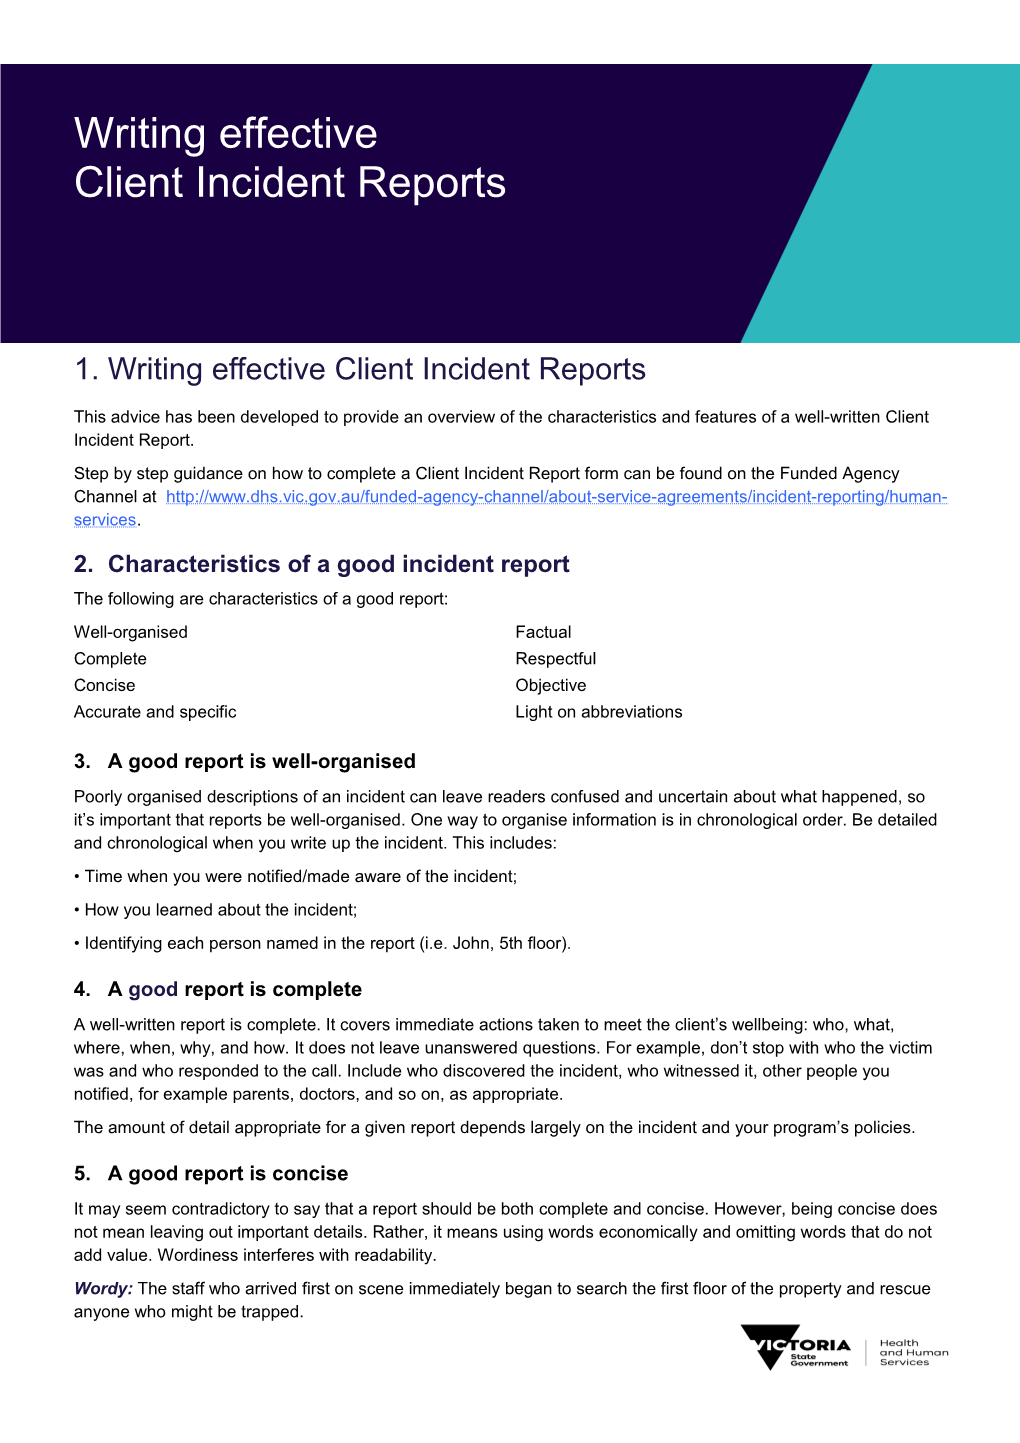 Writing Effective Client Incident Reports